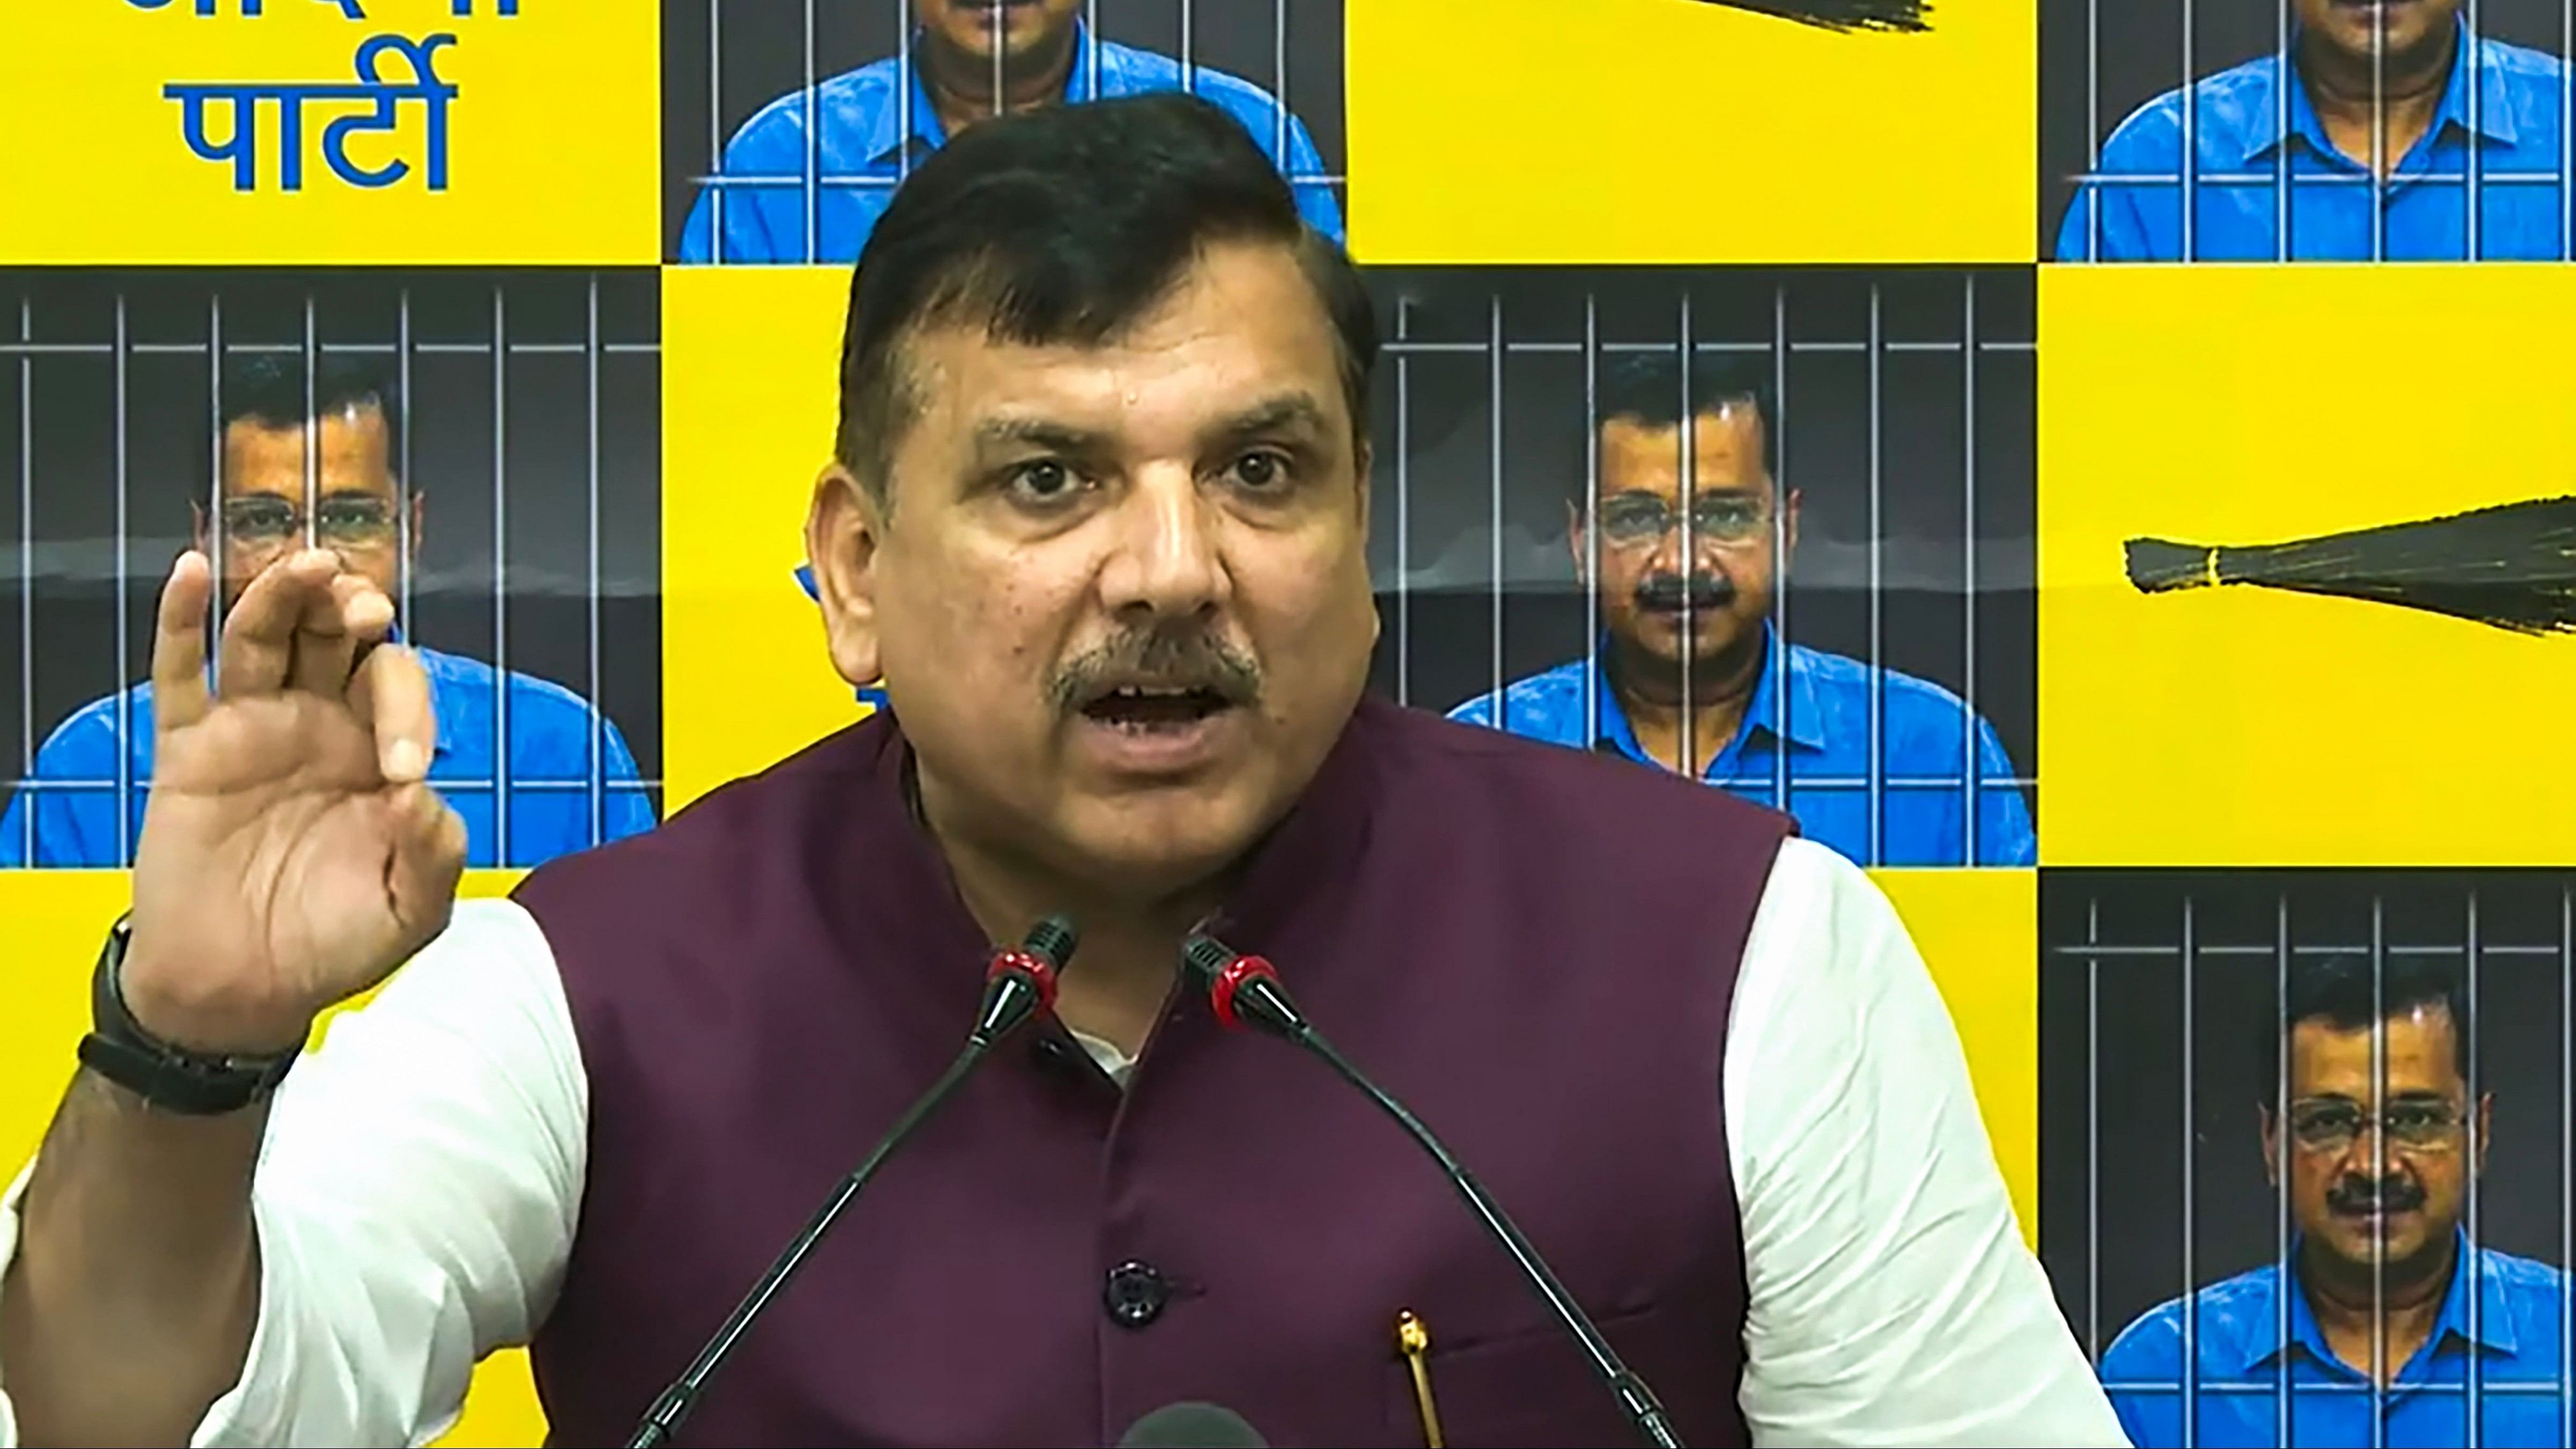 <div class="paragraphs"><p> AAP leader Sanjay Singh addresses a press conference regarding the arrest of Delhi CM Arvind Kejriwal by the CBI in connection with a money laundering case related to the Delhi liquor policy, in New Delhi.</p></div>